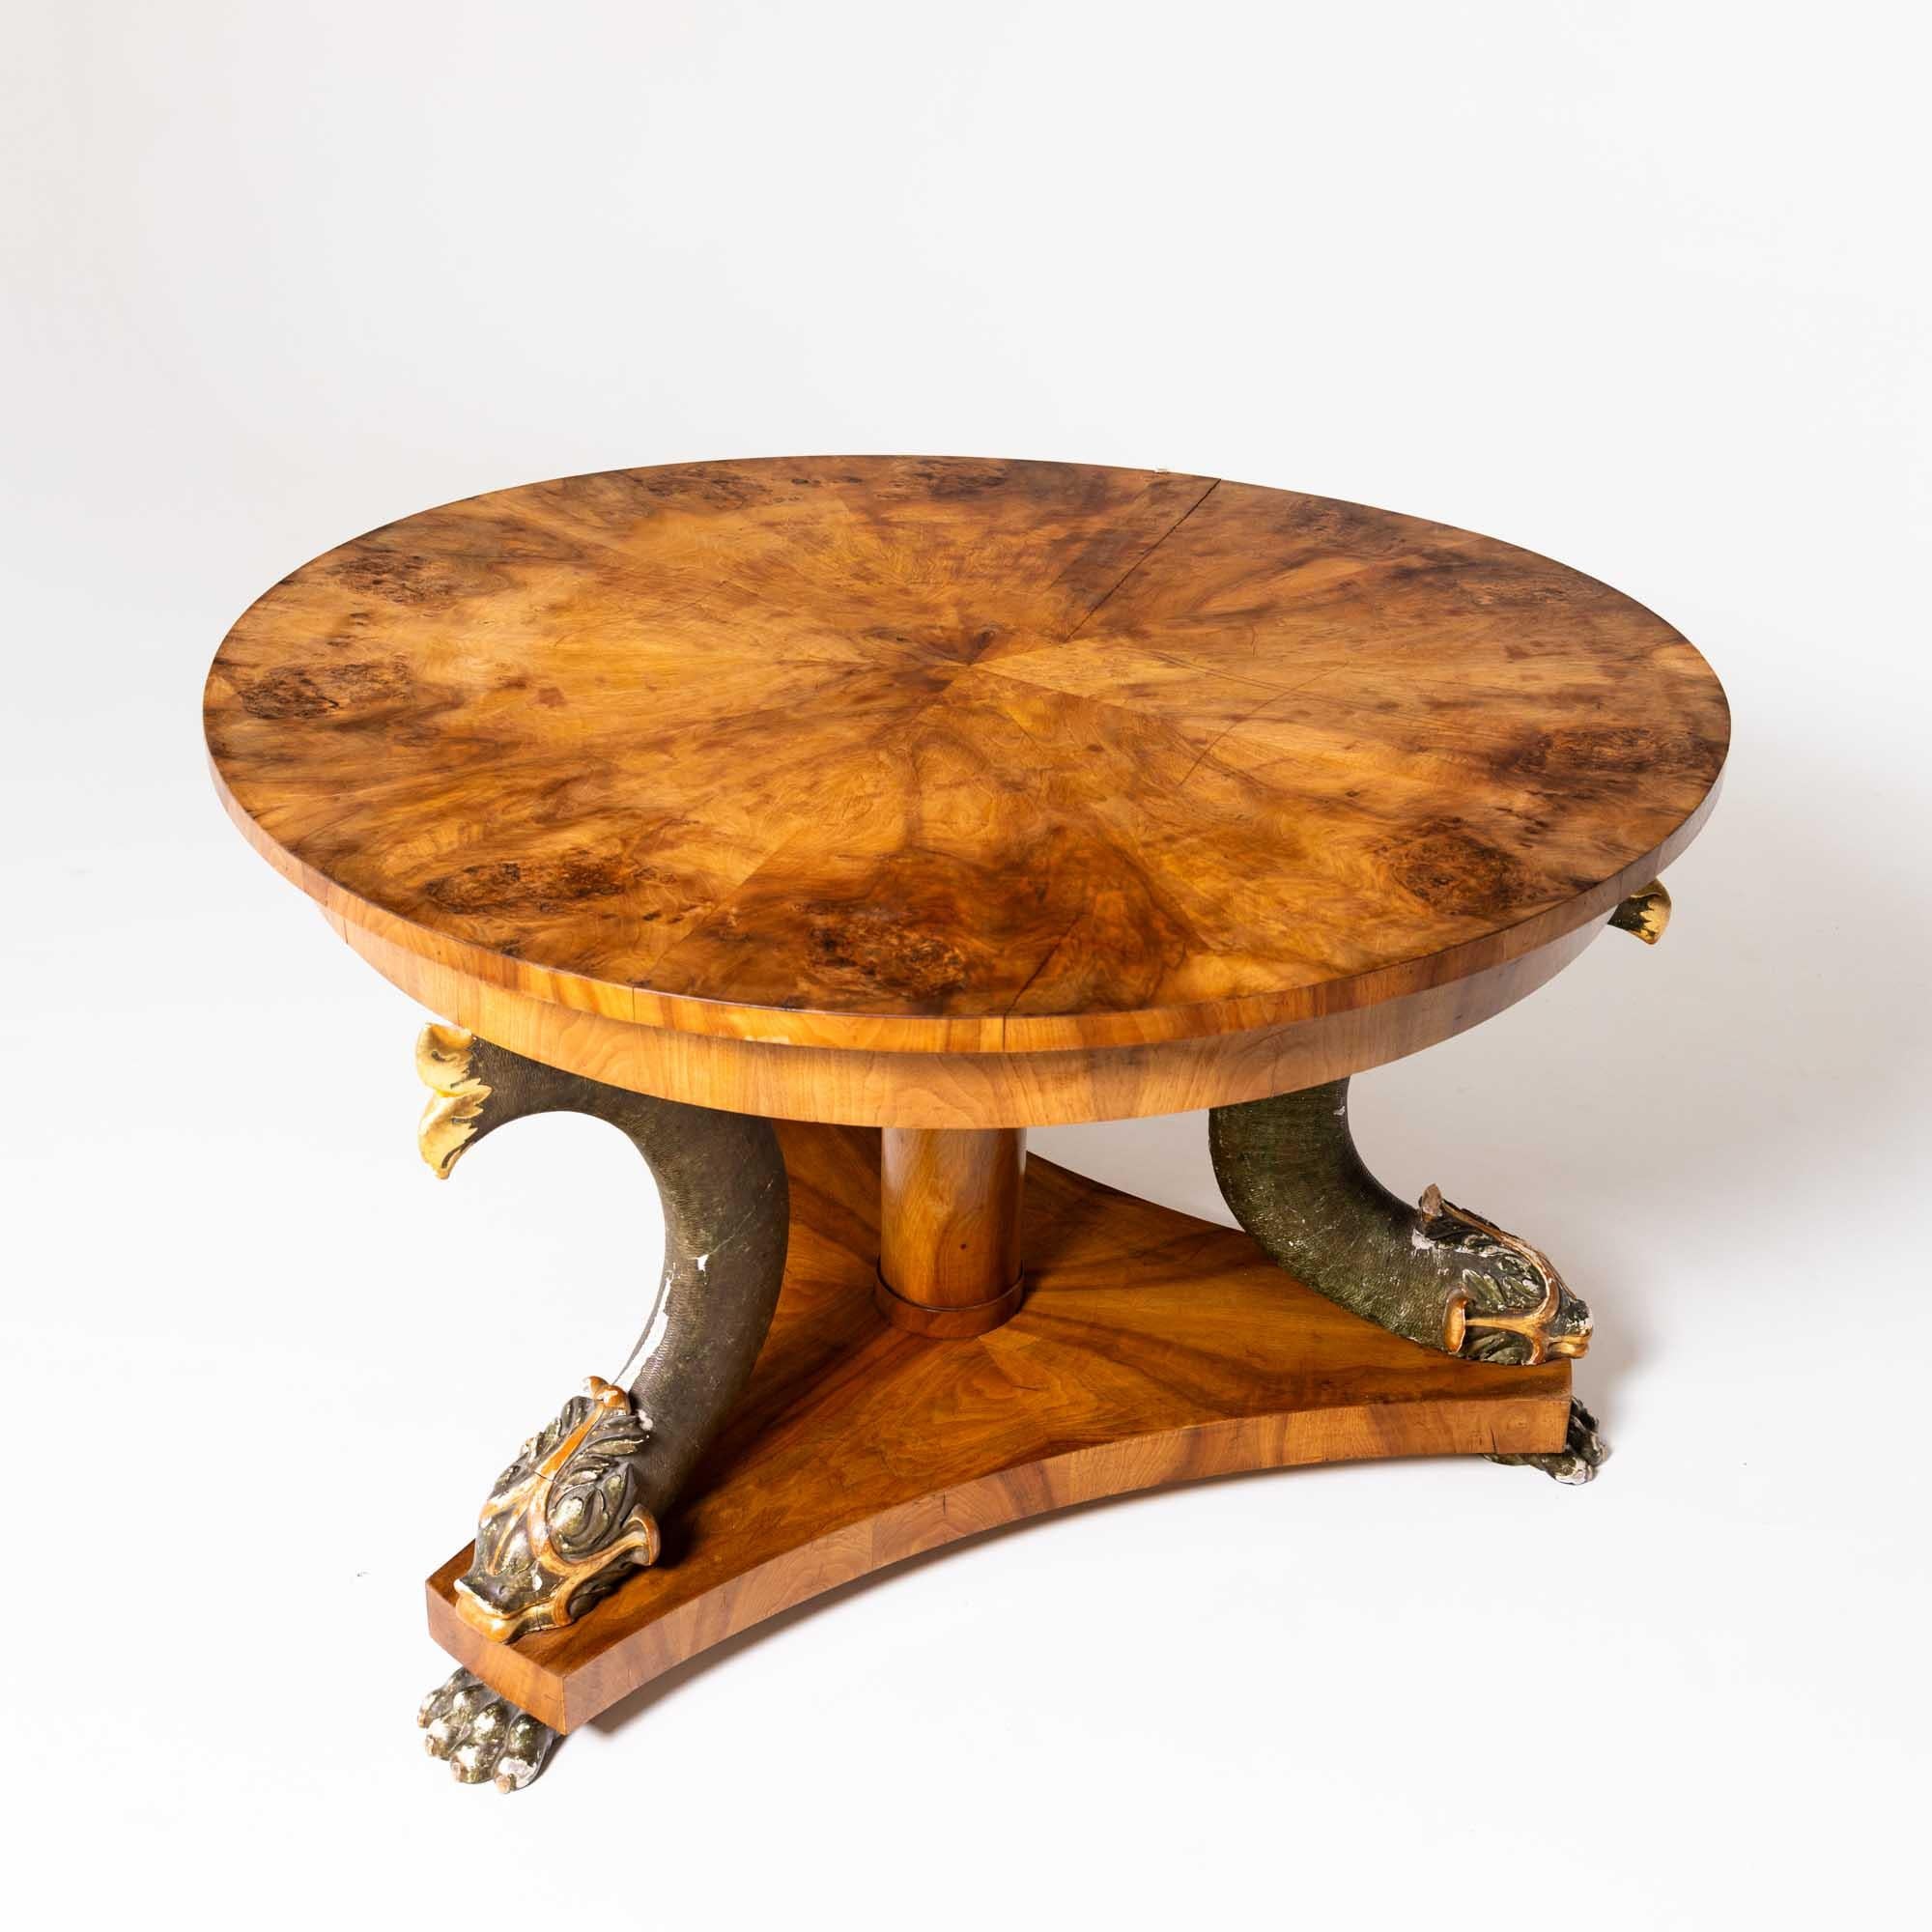 Carved Large Salon Table with Walnut Veneer and carved Dolphins, Germany circa 1820